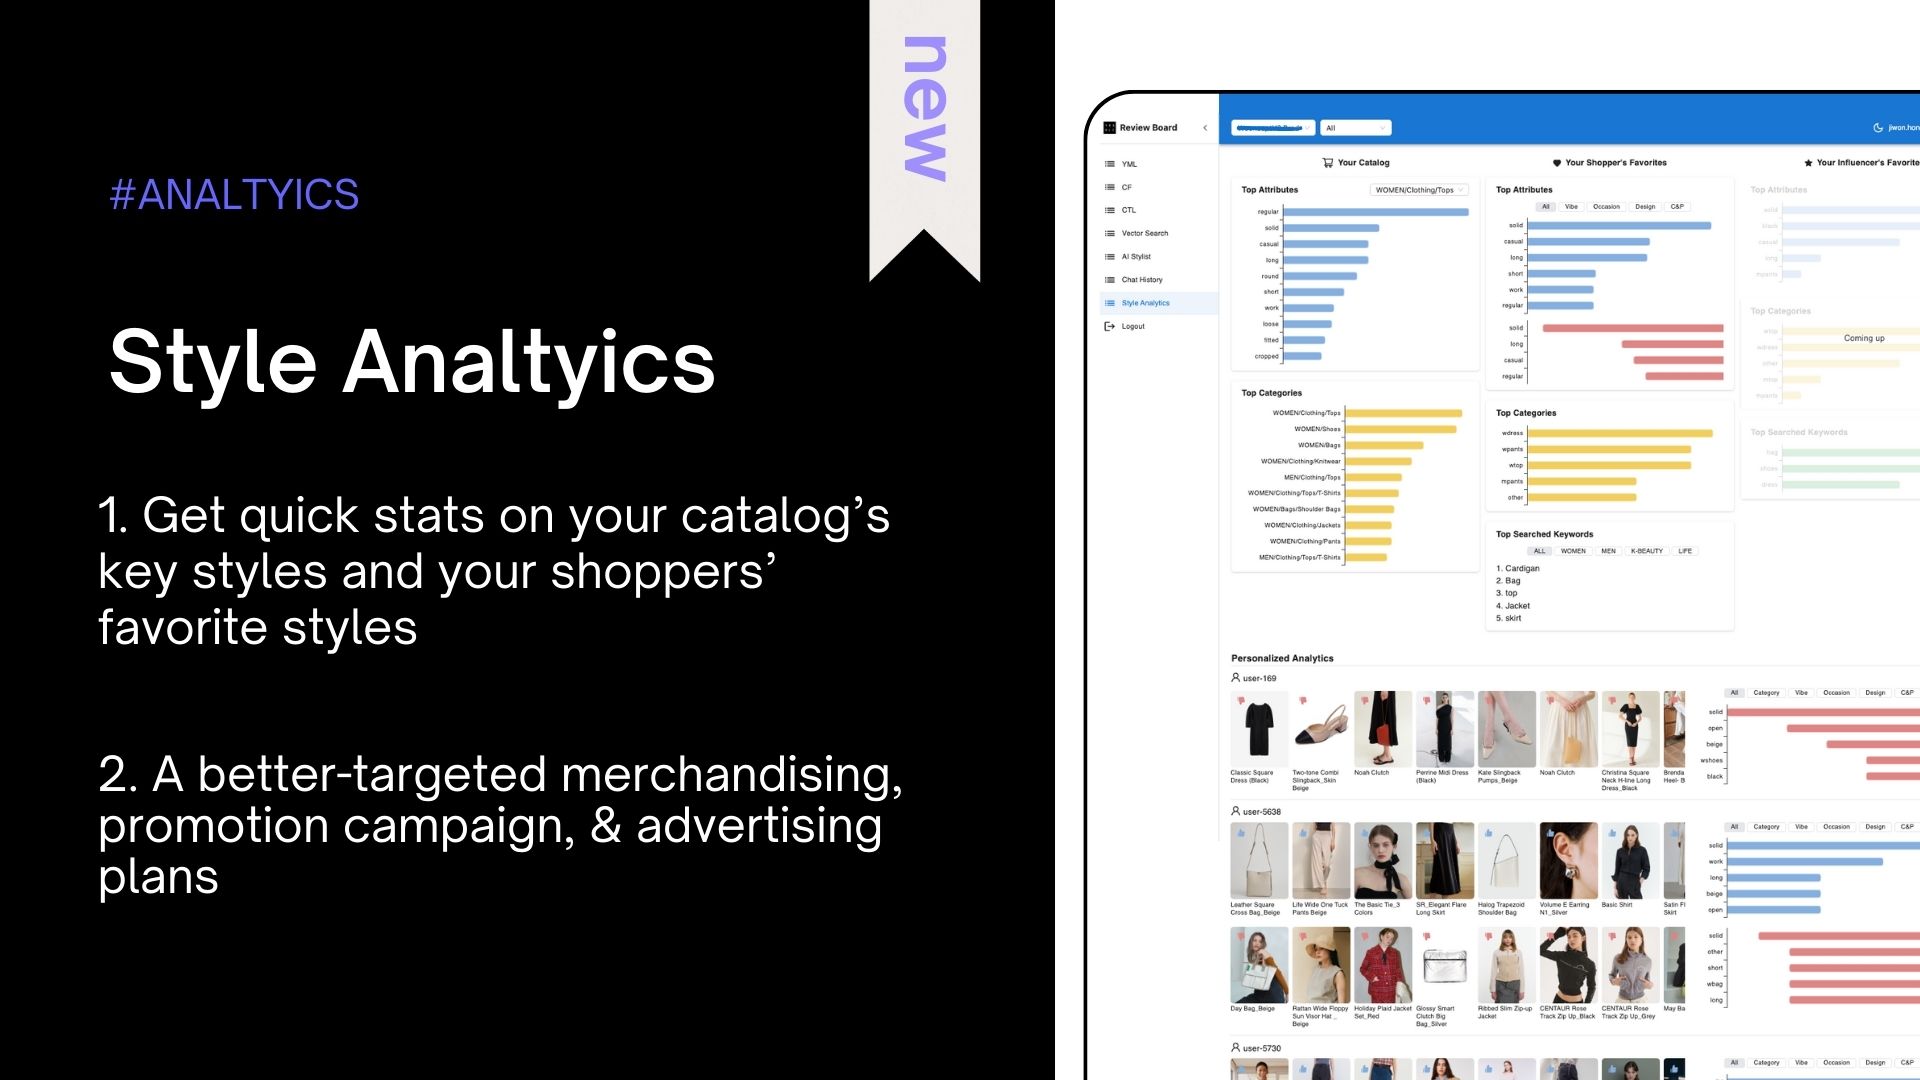 Style analytics for fashion brands